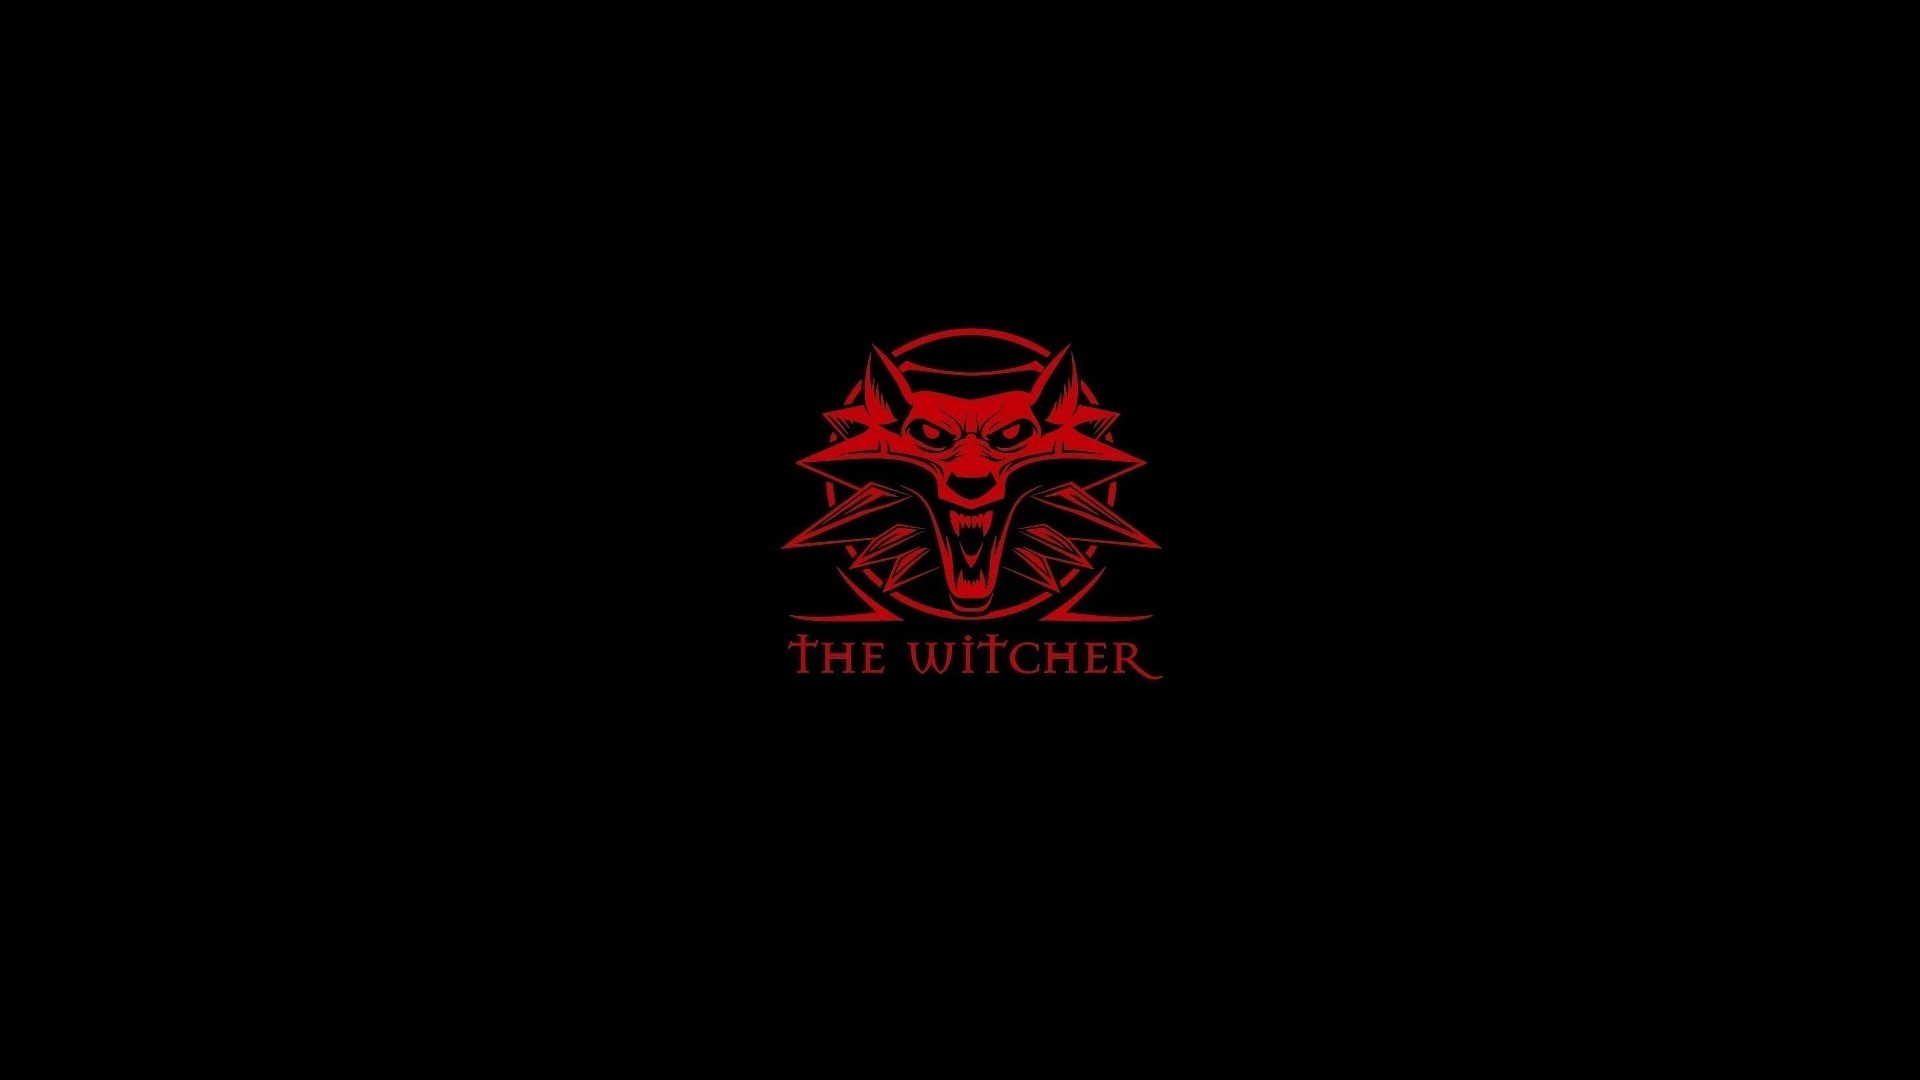 The Witcher Computer Wallpapers Desktop Backgrounds 1920x1080 ID